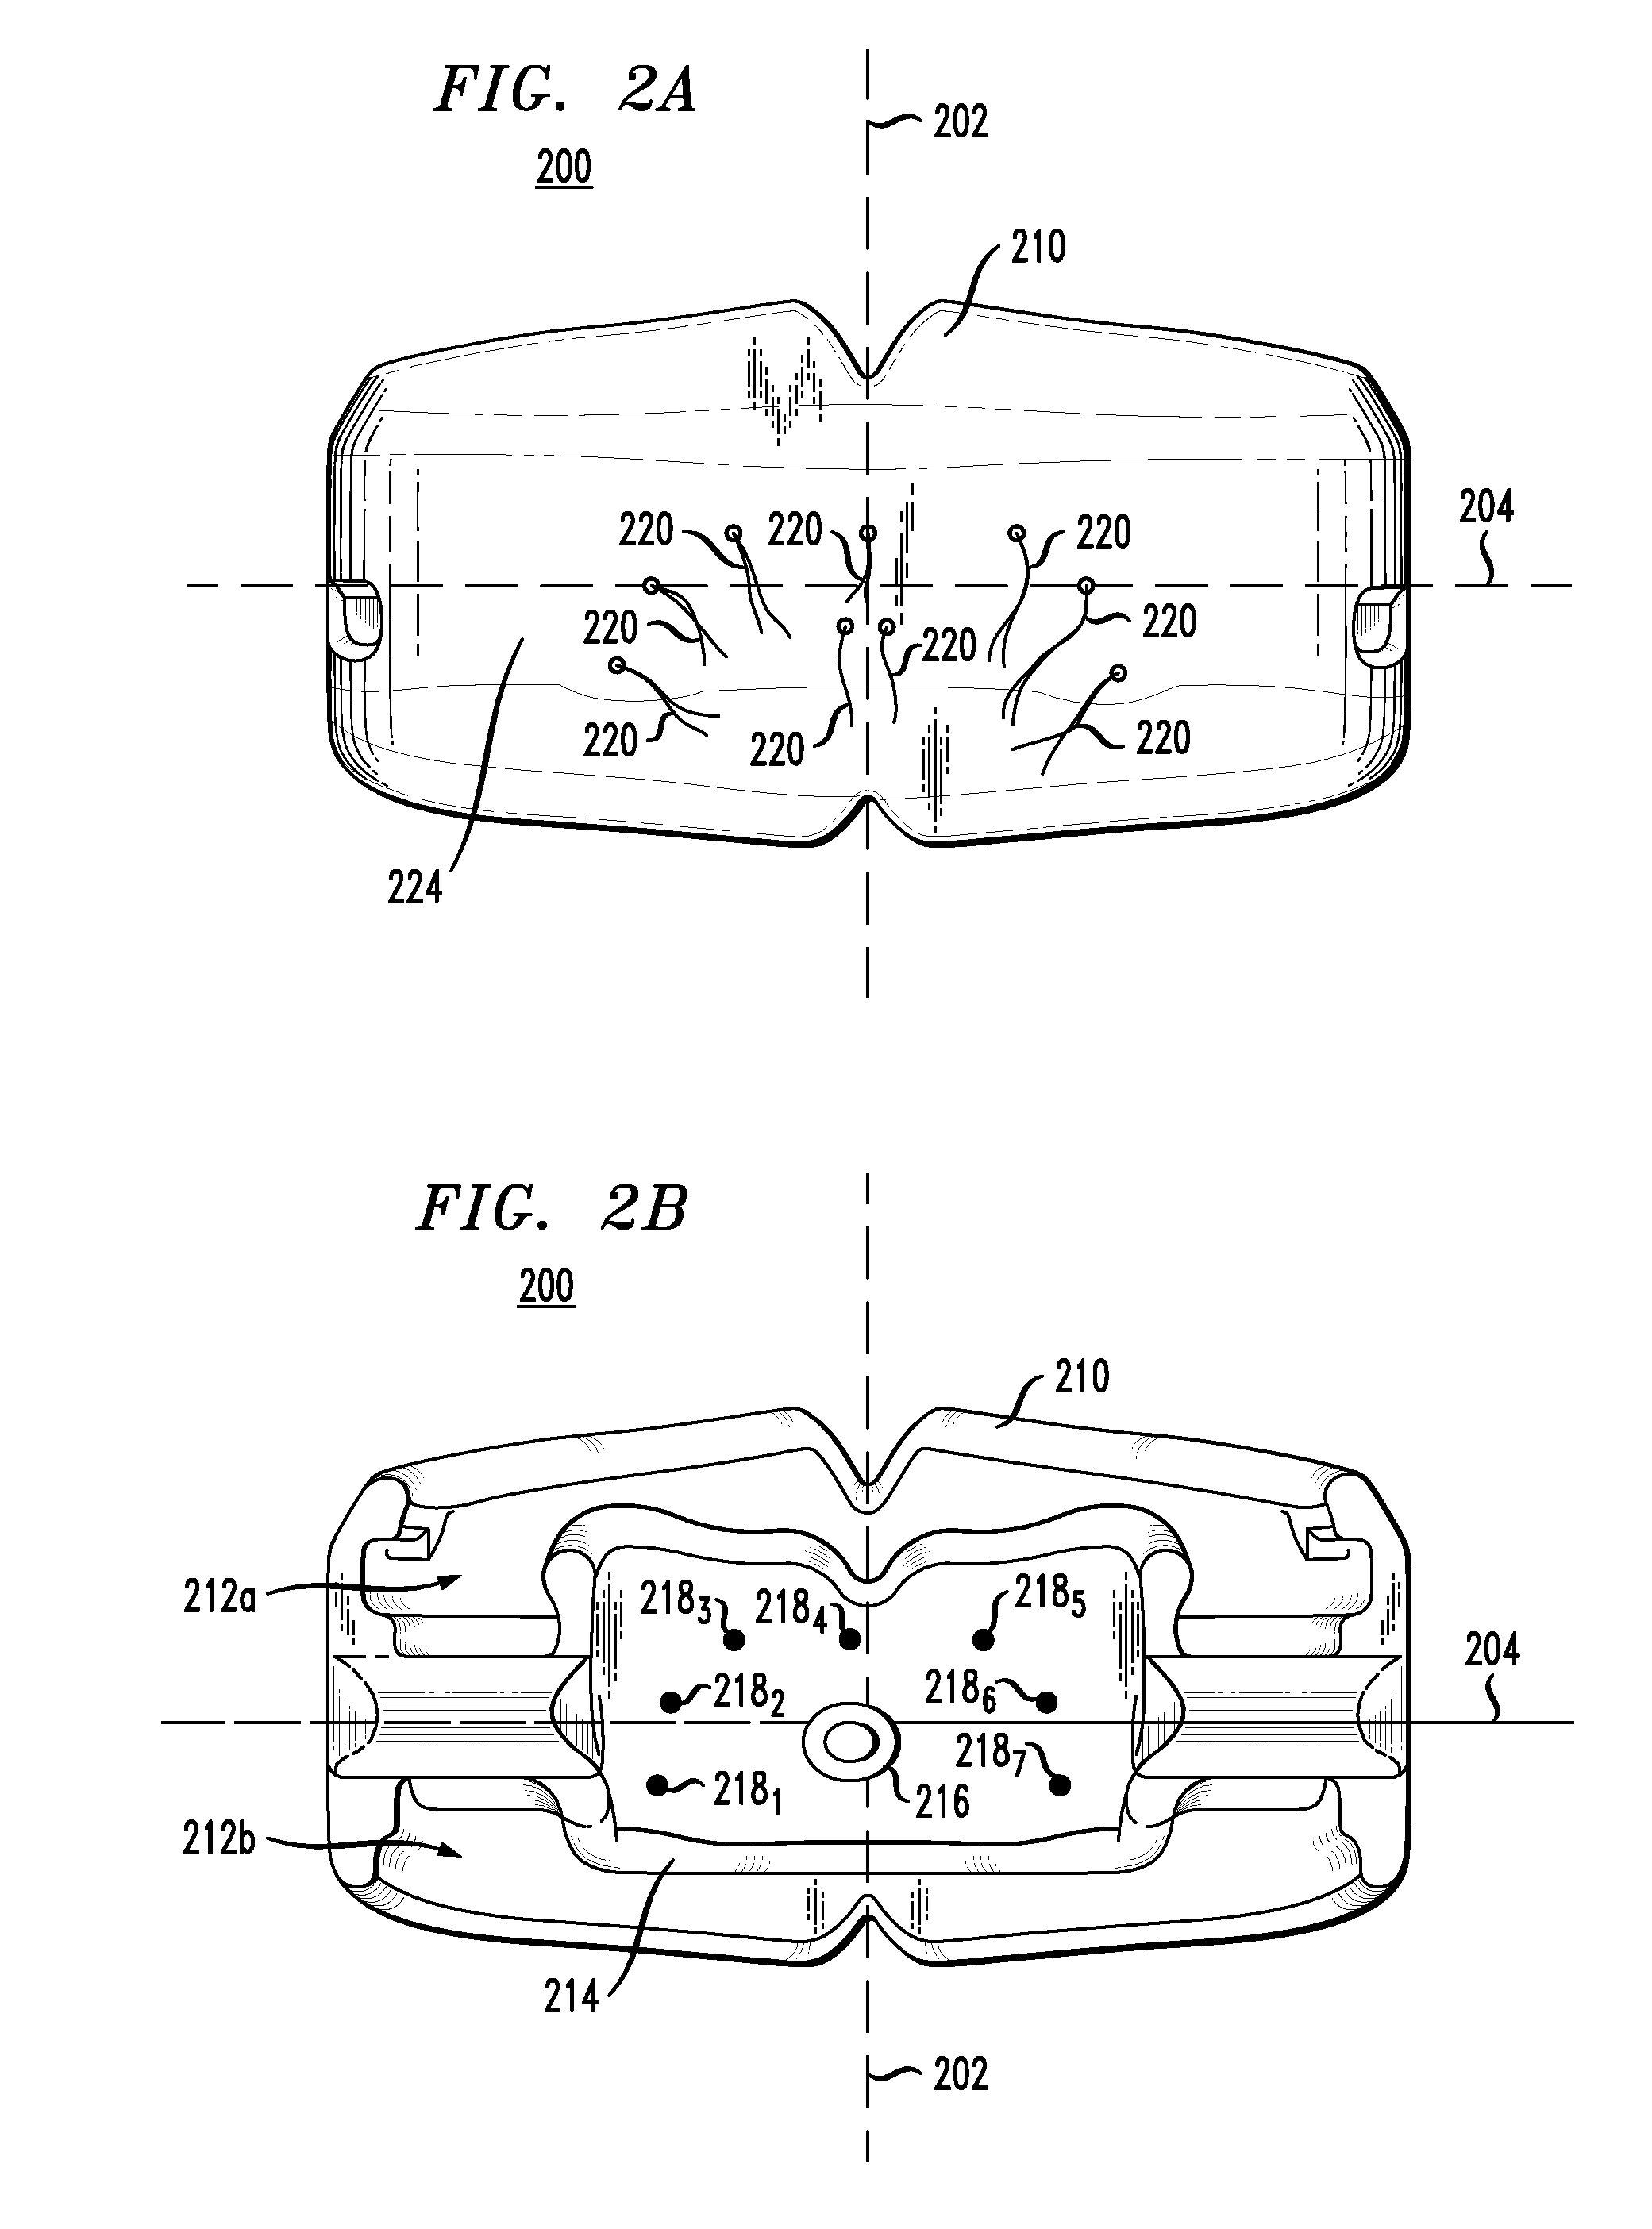 Biometric-Sensor Assembly, Such as for Acoustic Reflectometry of the Vocal Tract